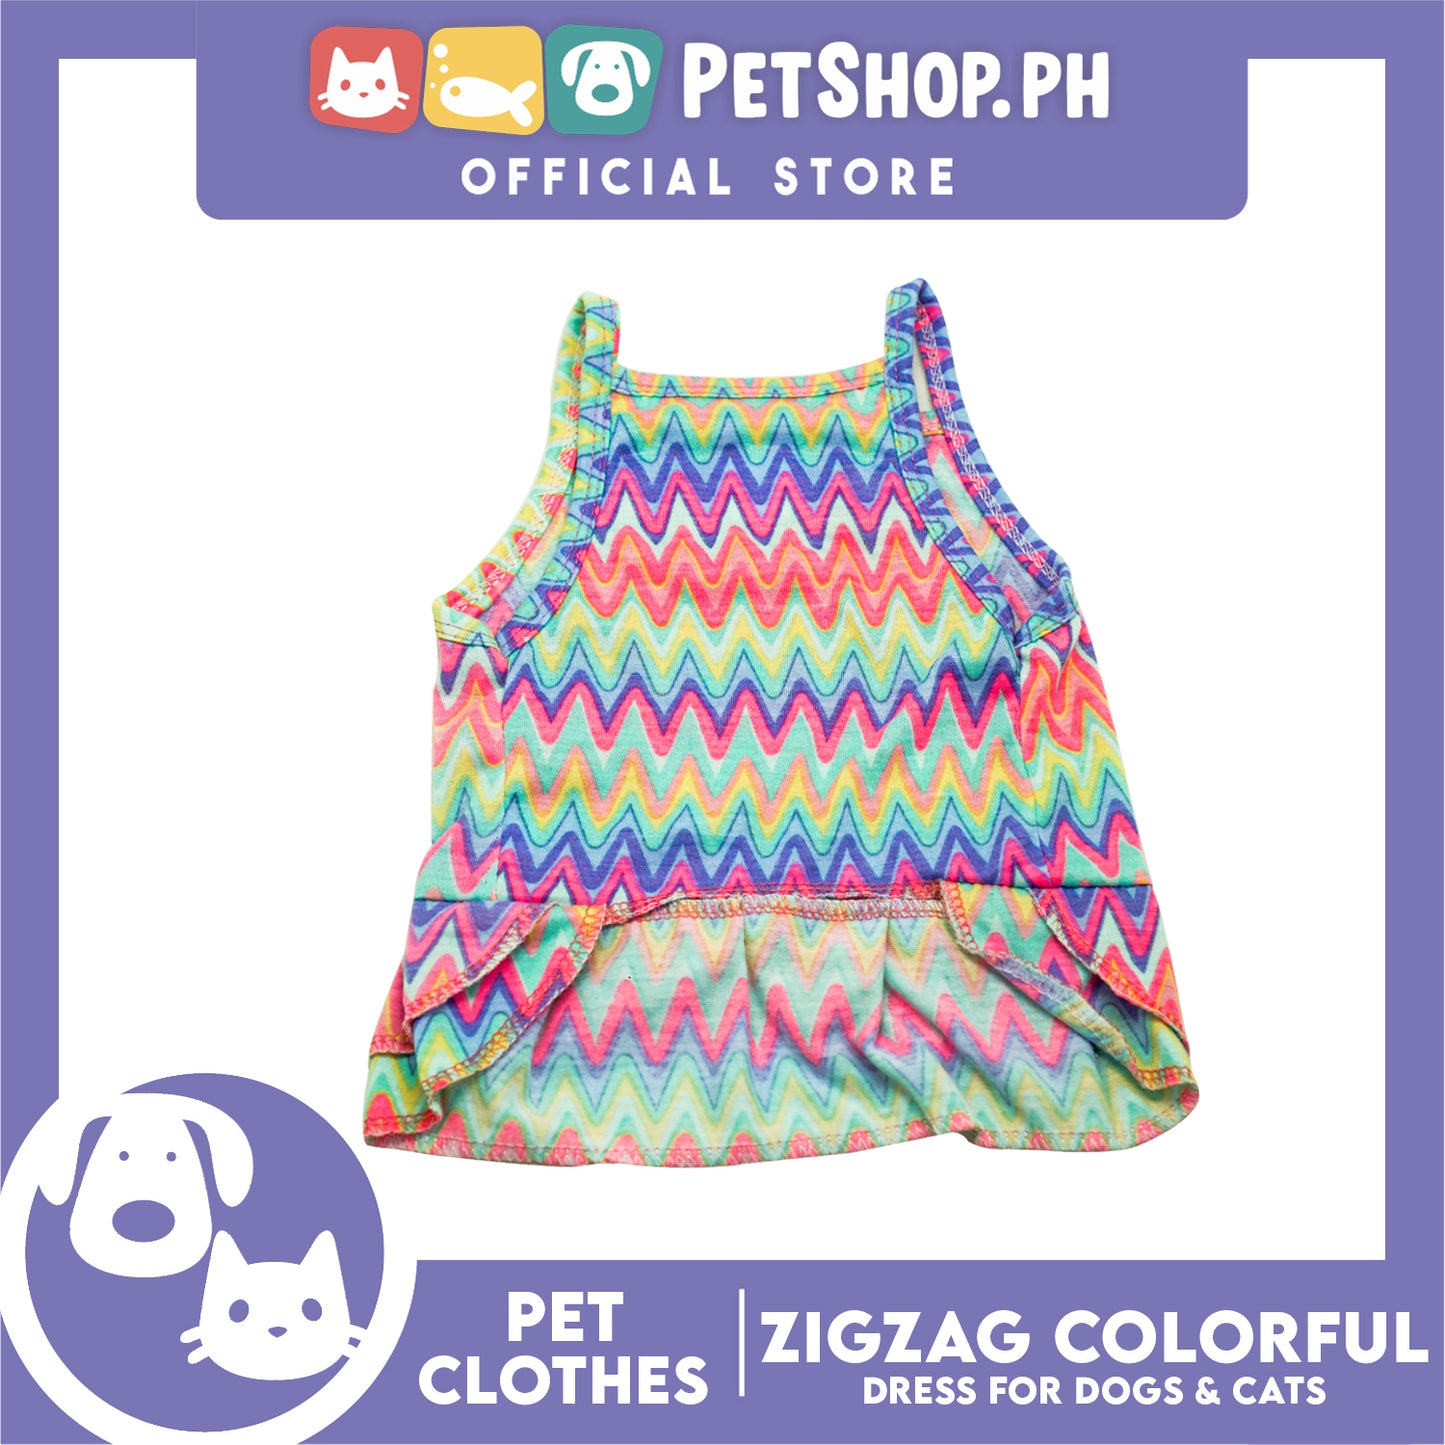 Pet Dress Zigzag Colorful Abstract Dress (XL) Suitable for Dogs and Cats